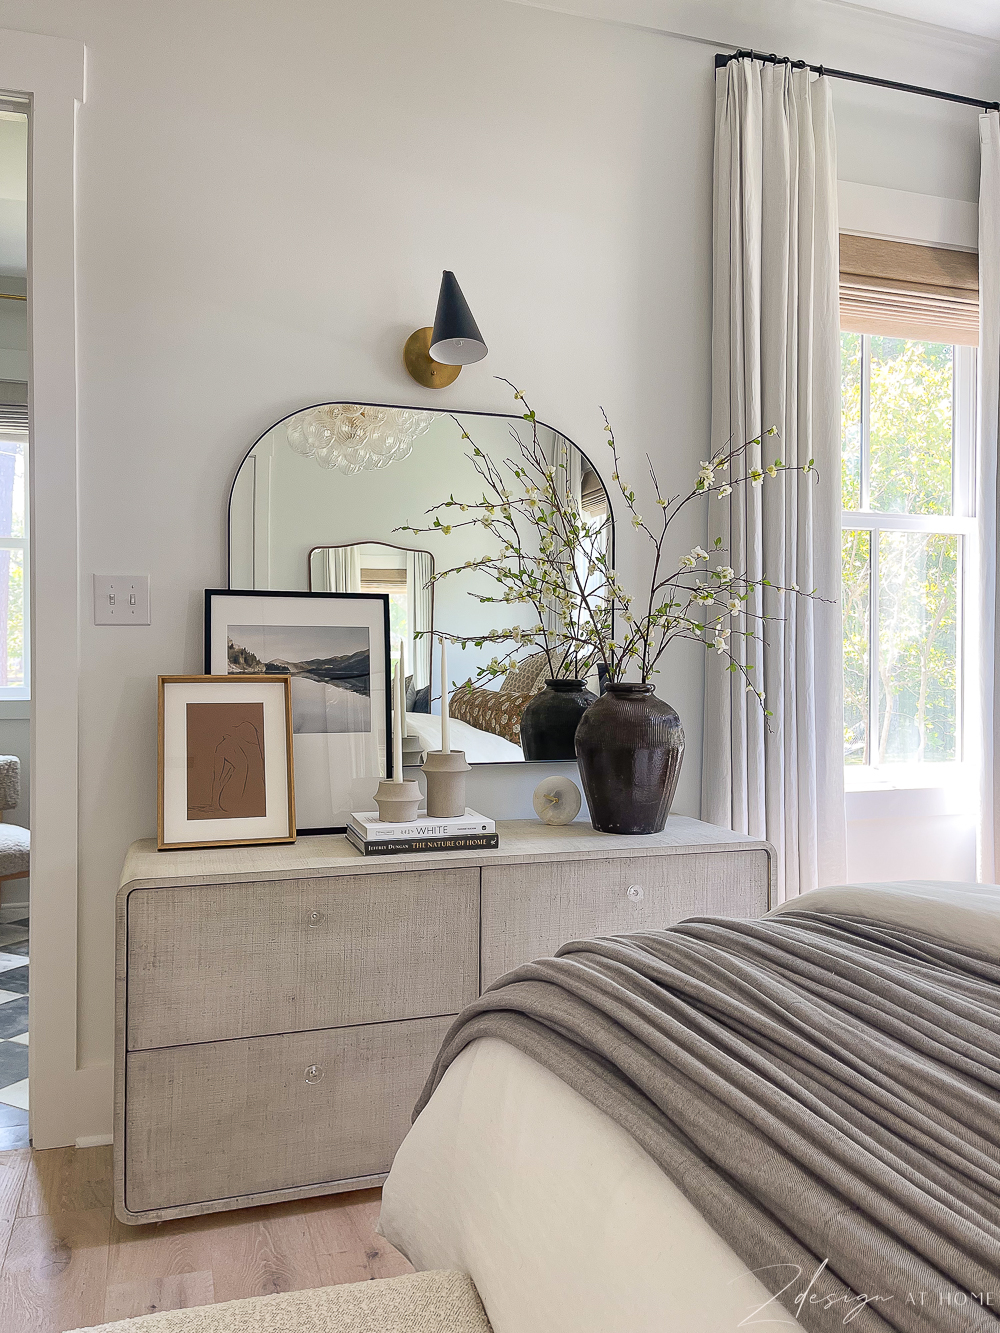 styled bedroom dresser with arched mirror and sconce over mirror, white linen custom curtains 